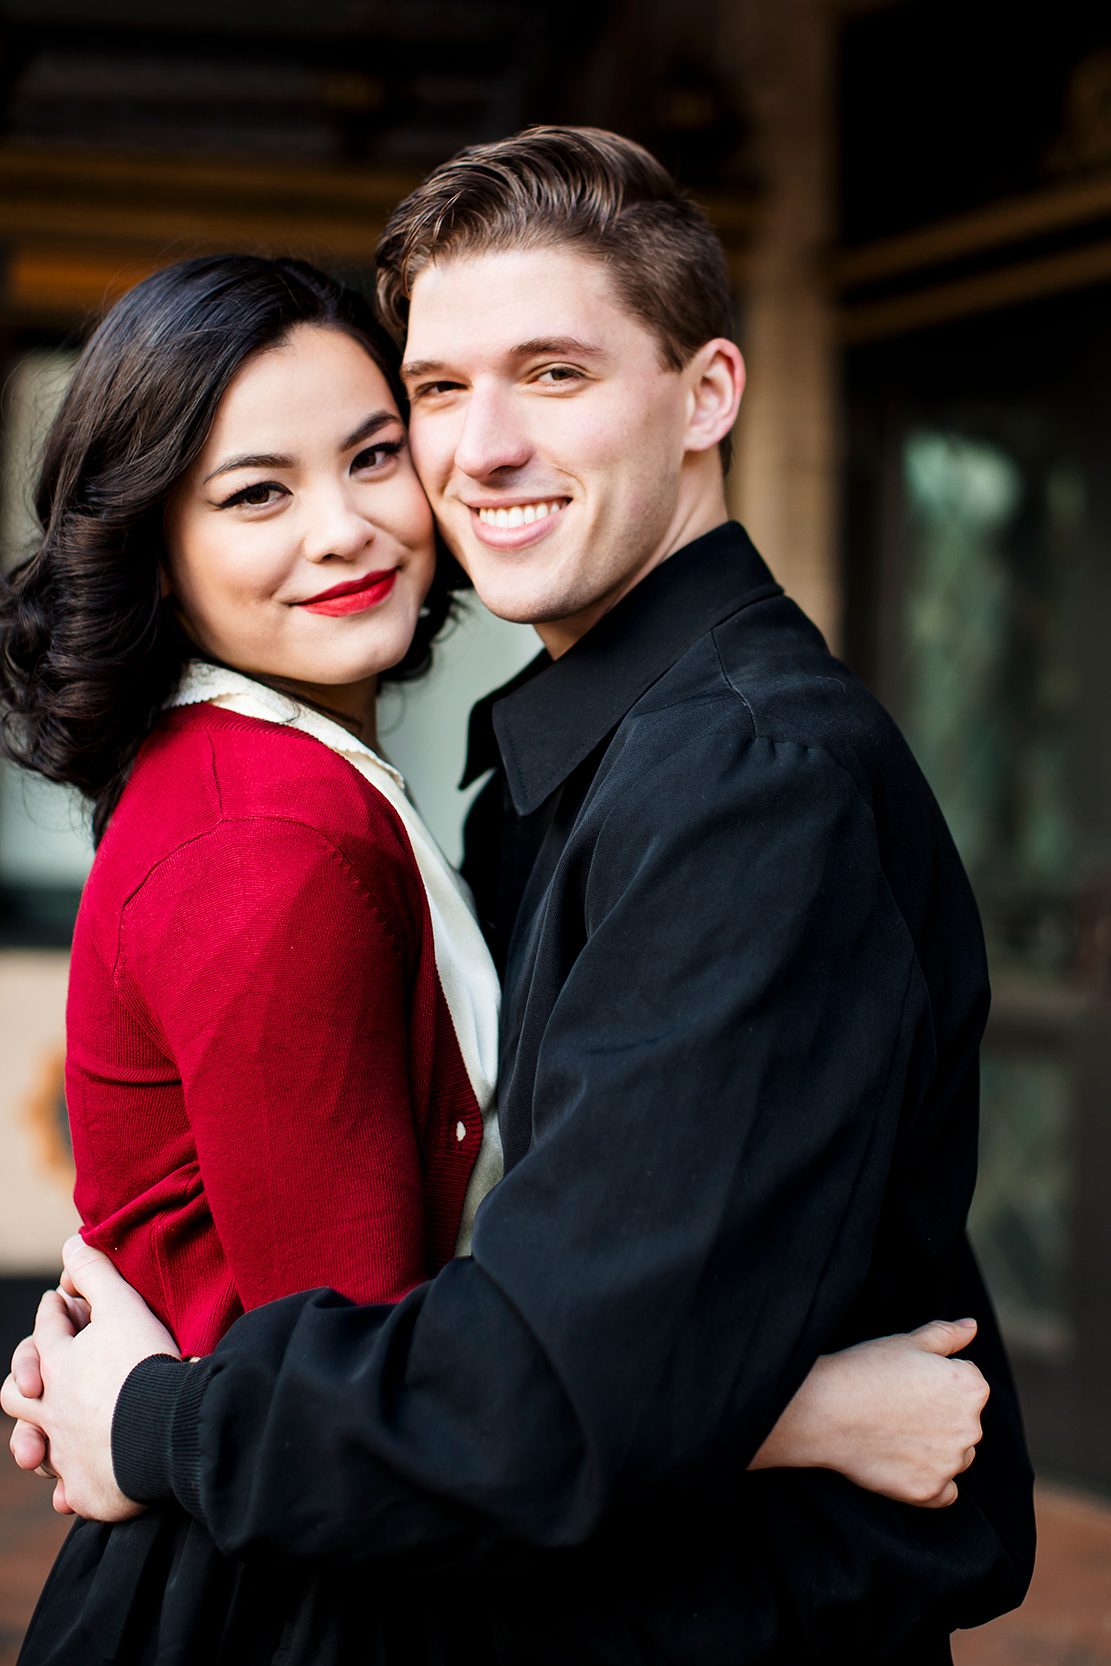 1950s Inspired Styled Couples Shoot - Image Property of www.j-dphoto.com